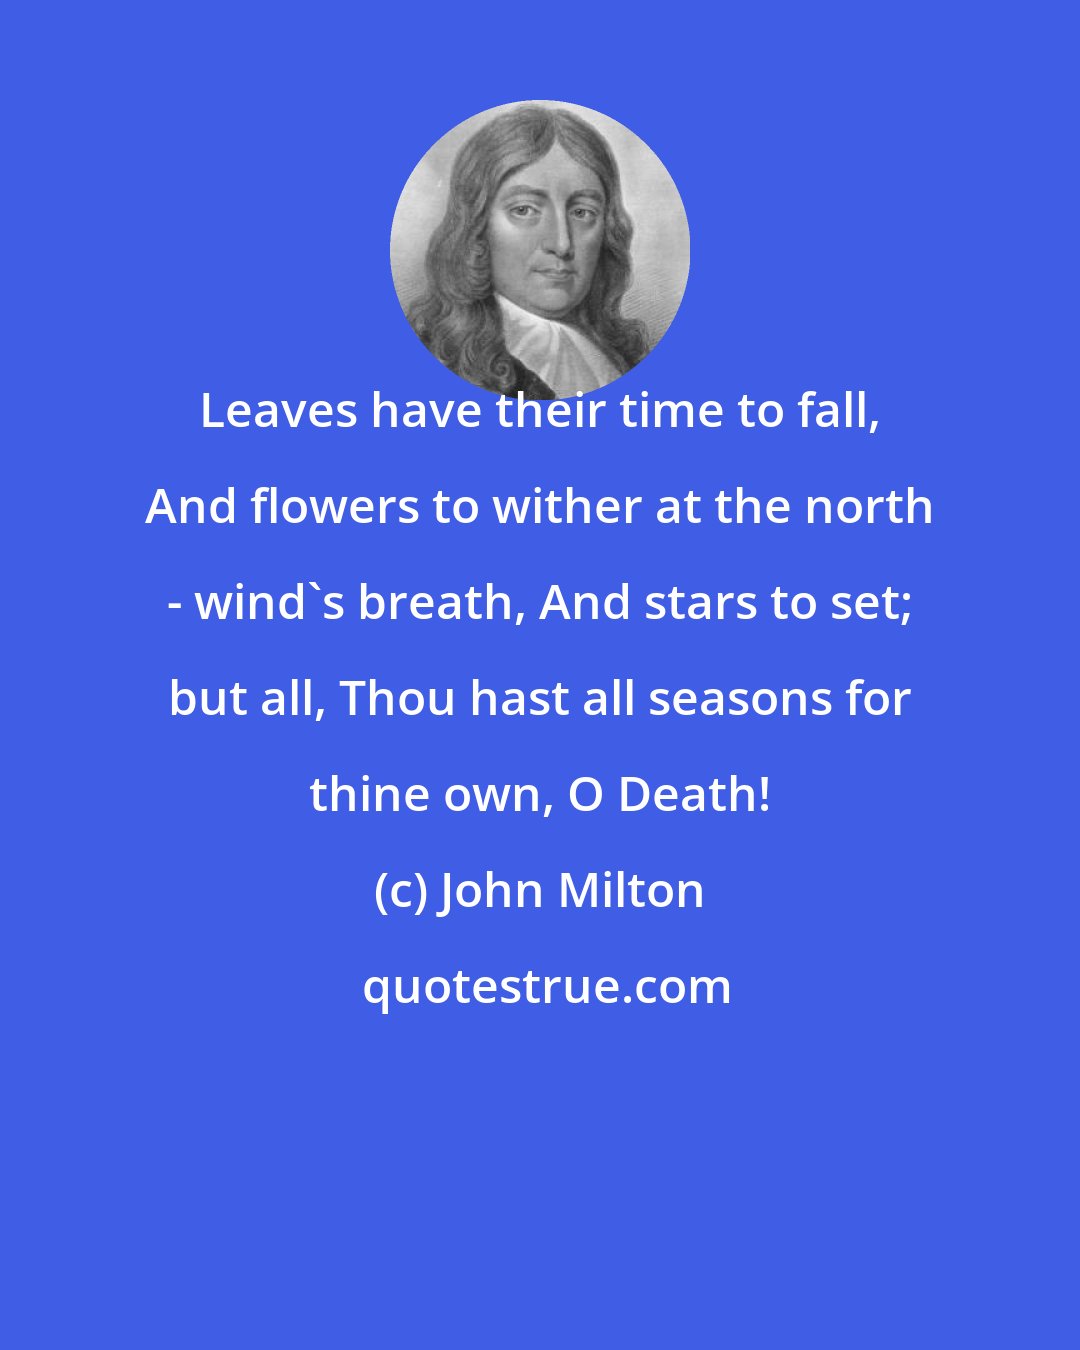 John Milton: Leaves have their time to fall, And flowers to wither at the north - wind's breath, And stars to set; but all, Thou hast all seasons for thine own, O Death!